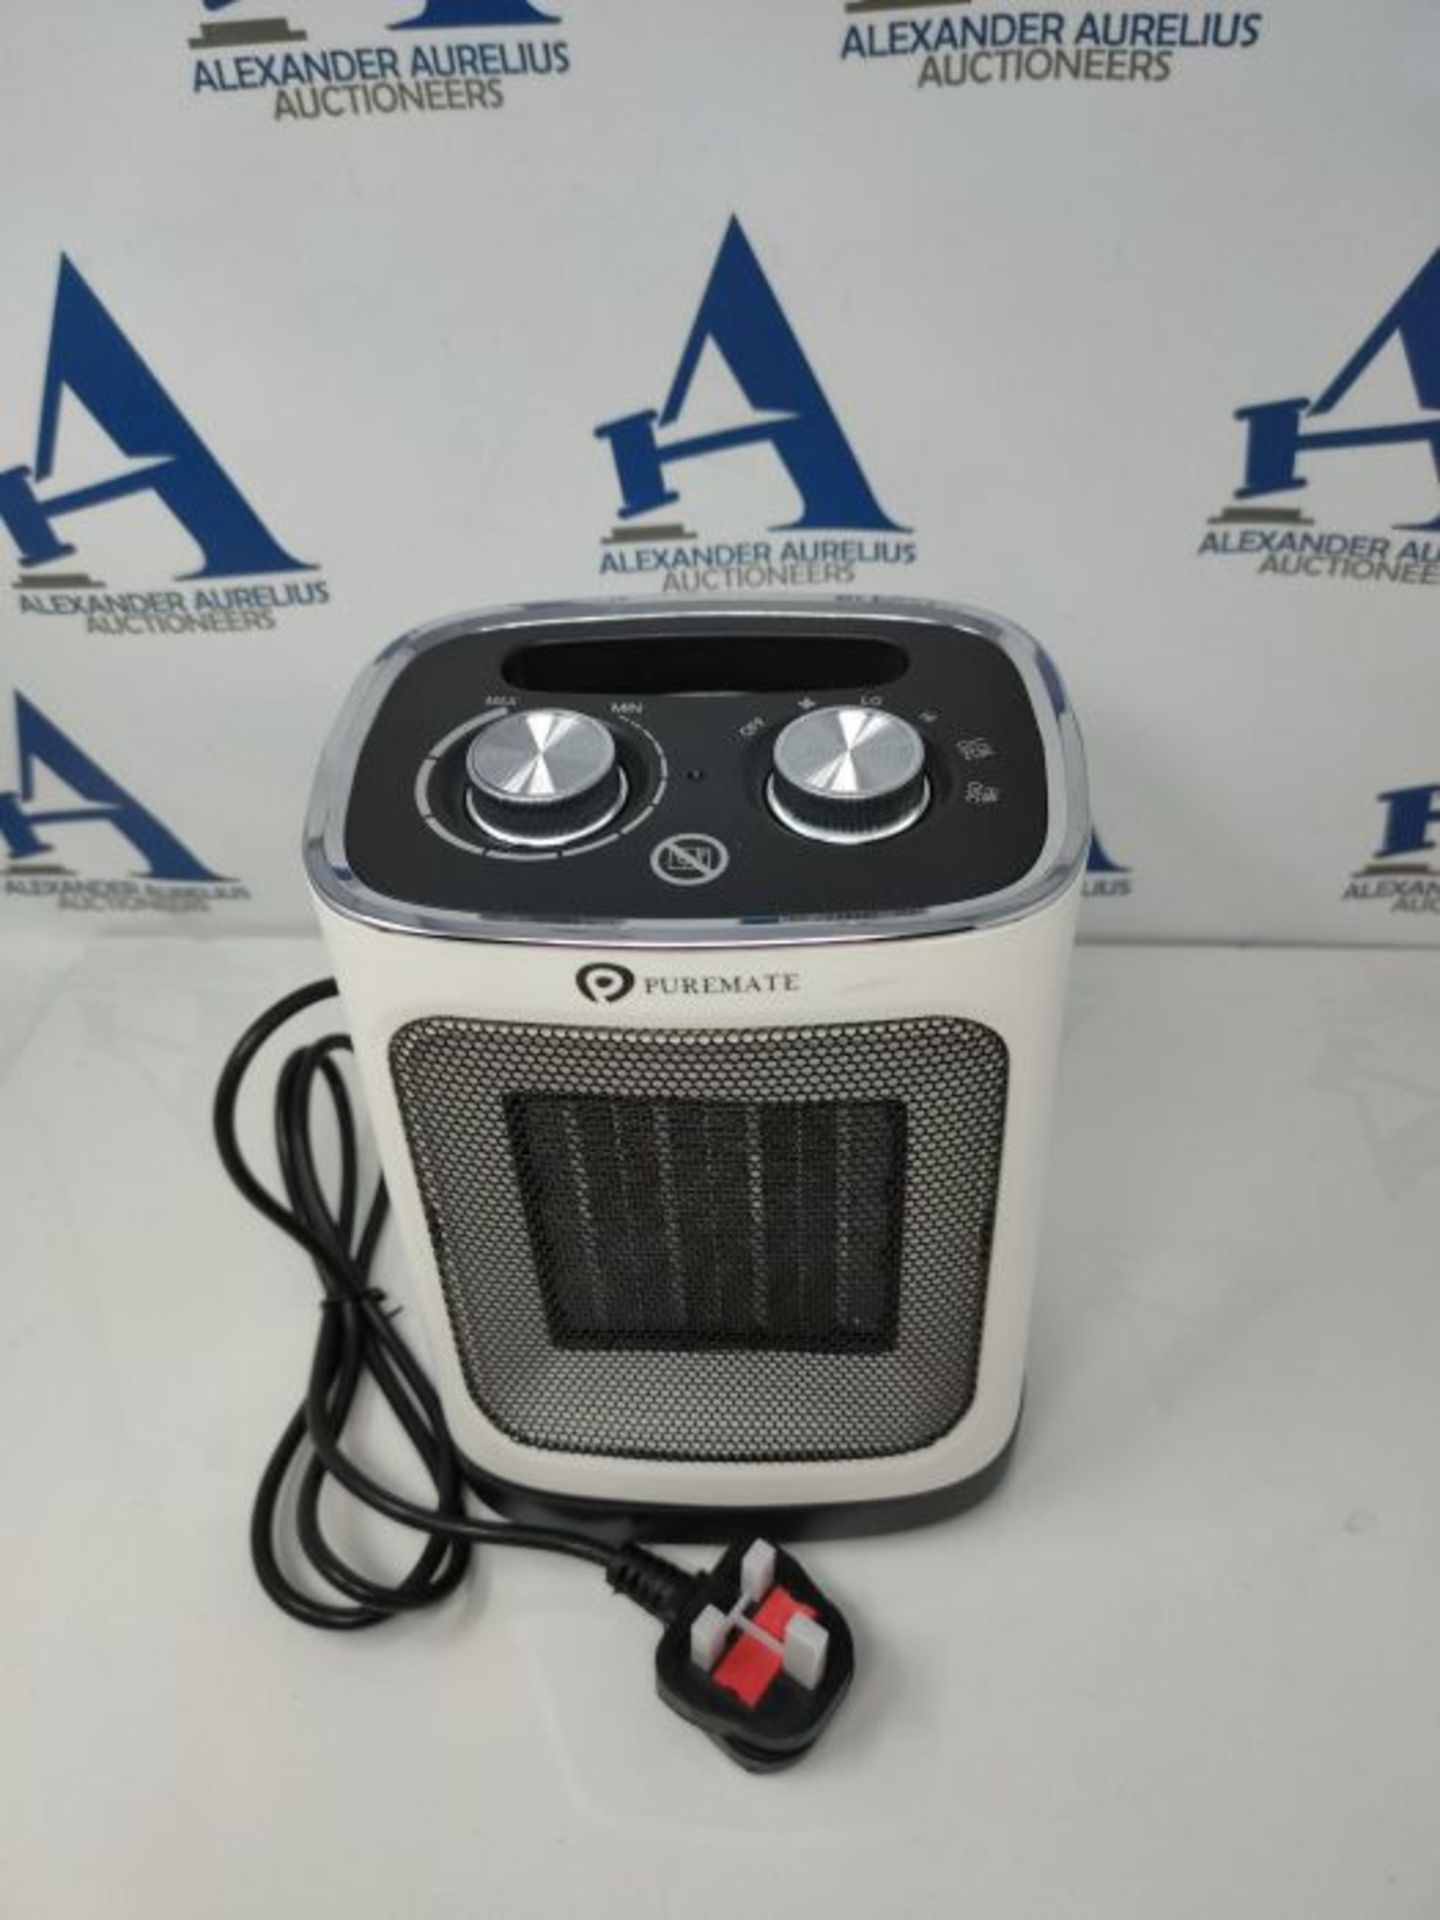 RRP £97.00 QHYTL PureMate Ceramic Fan Heater, 1800W Portable Electric Heater with 2 Heat Settings - Image 6 of 6